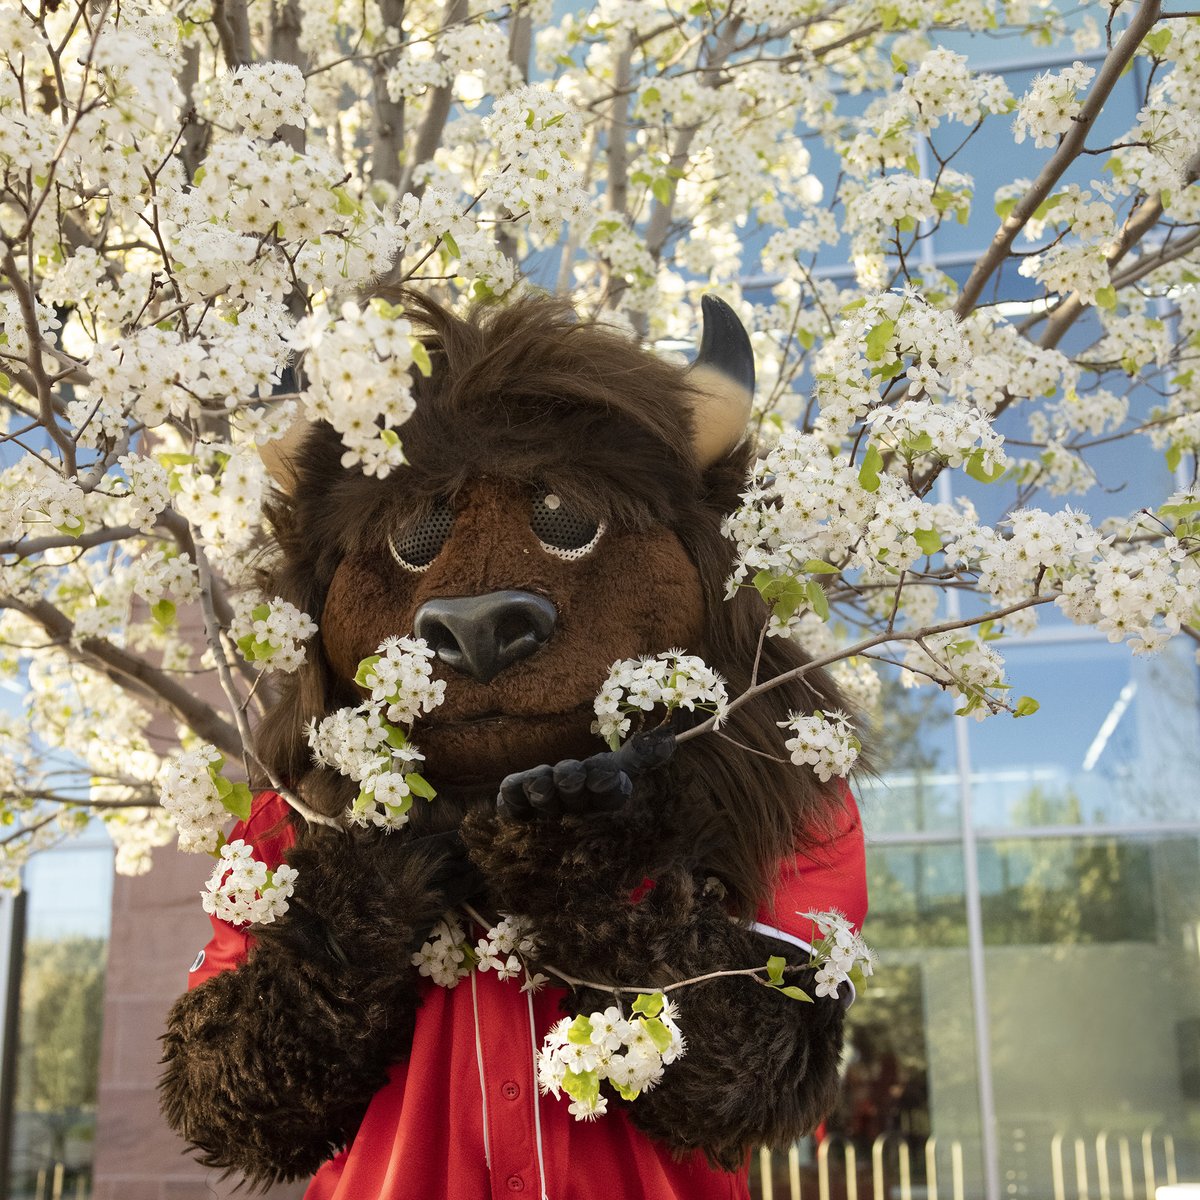 Who needs April showers when March already has the flowers? Campus is BLOOMING, Trailblazers! Happy first day of spring!